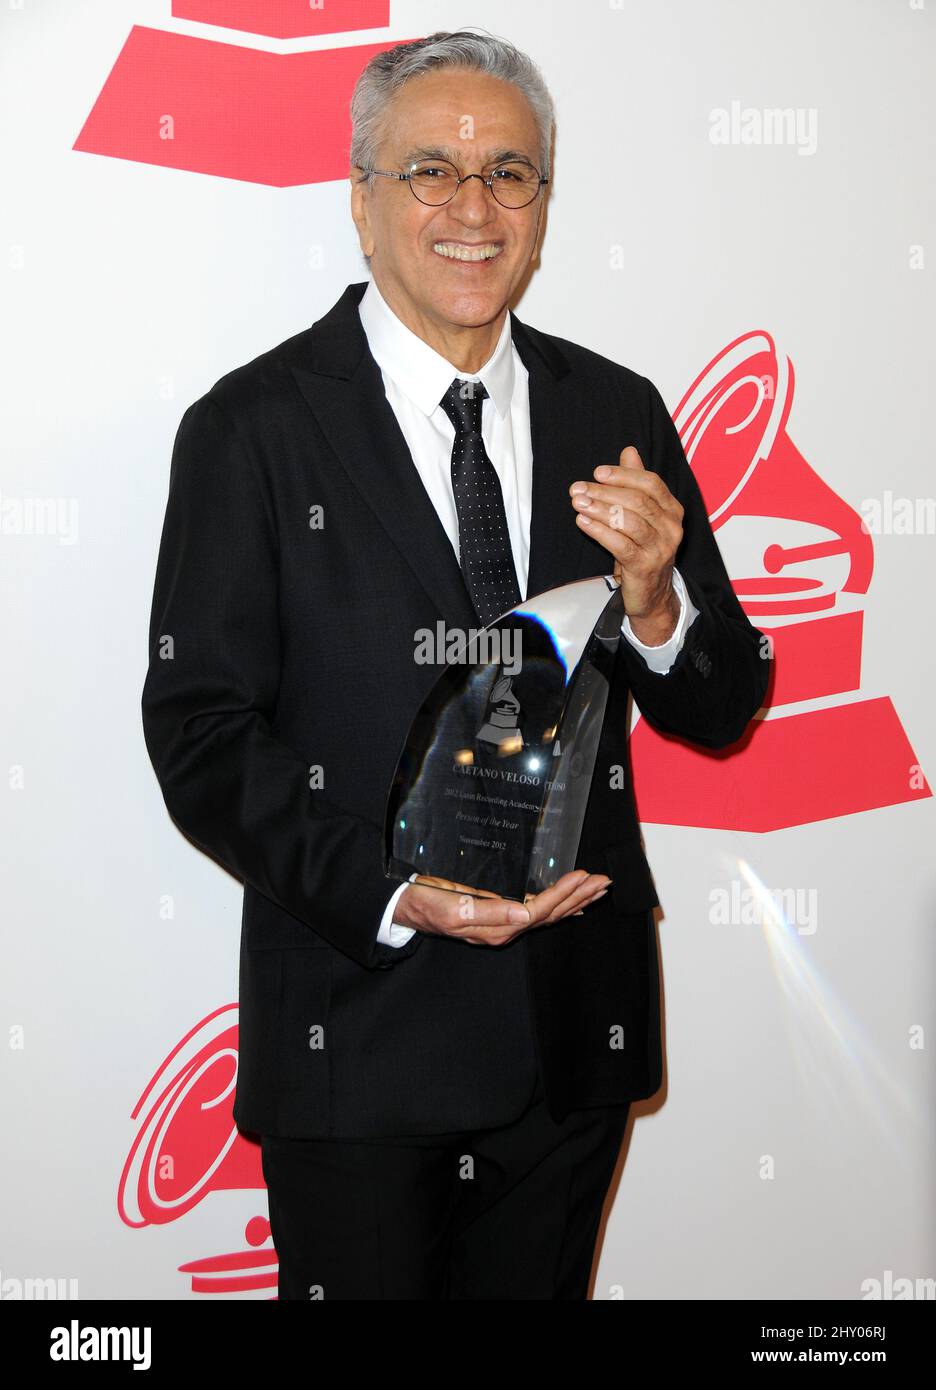 Caetano Veloso attending the 2012 Latin Recording Academy Person of the Year Tribute to Caetano Veloso held at the MGM Grand Garden Arena in Las Vegas, USA. Stock Photo